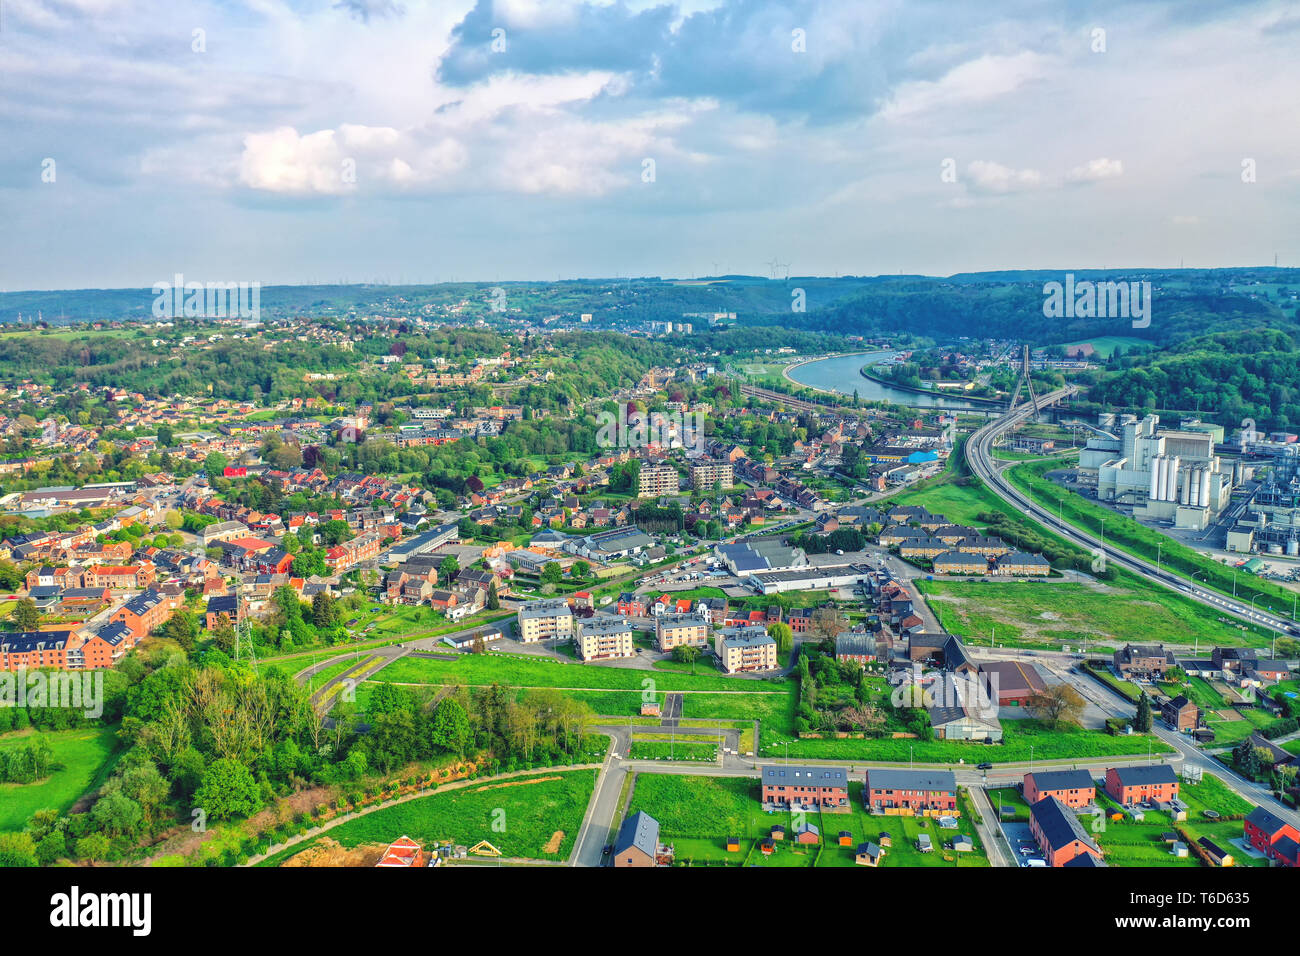 View over the city of Huy in Belgium and Meuse River to the distant nuclear power station of Tihange Stock Photo